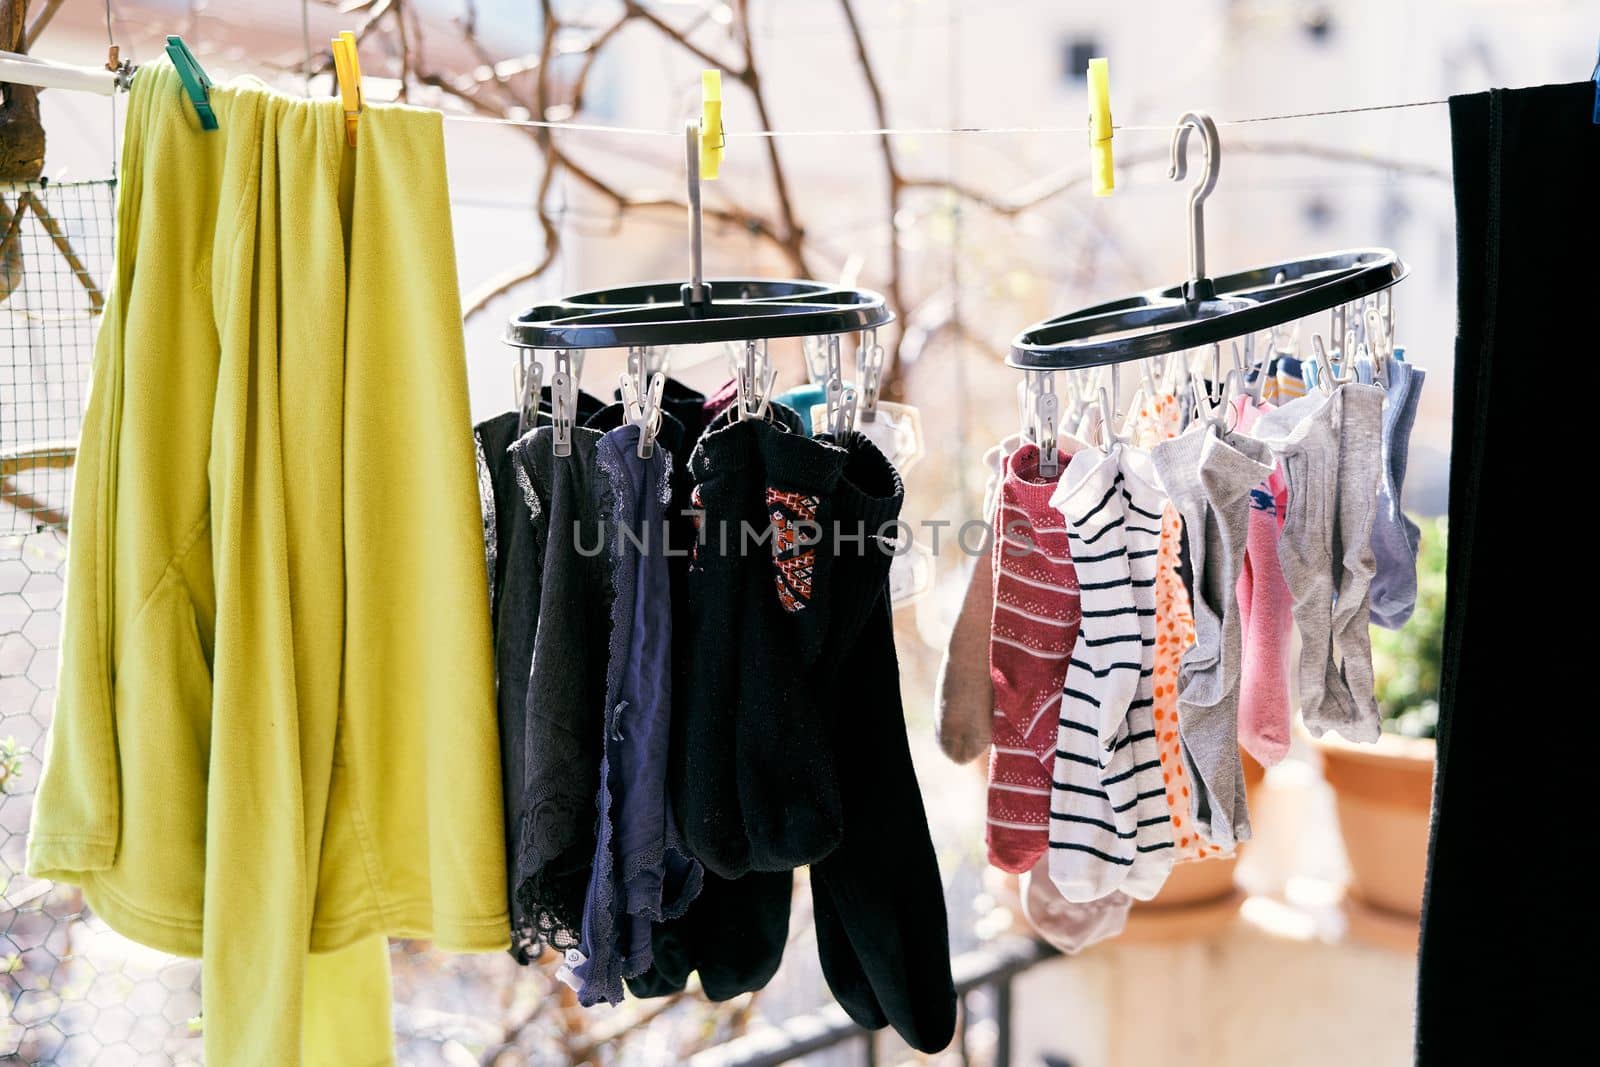 Drying clothes on a rope - jacket, socks and underpants. Close-up. High quality photo